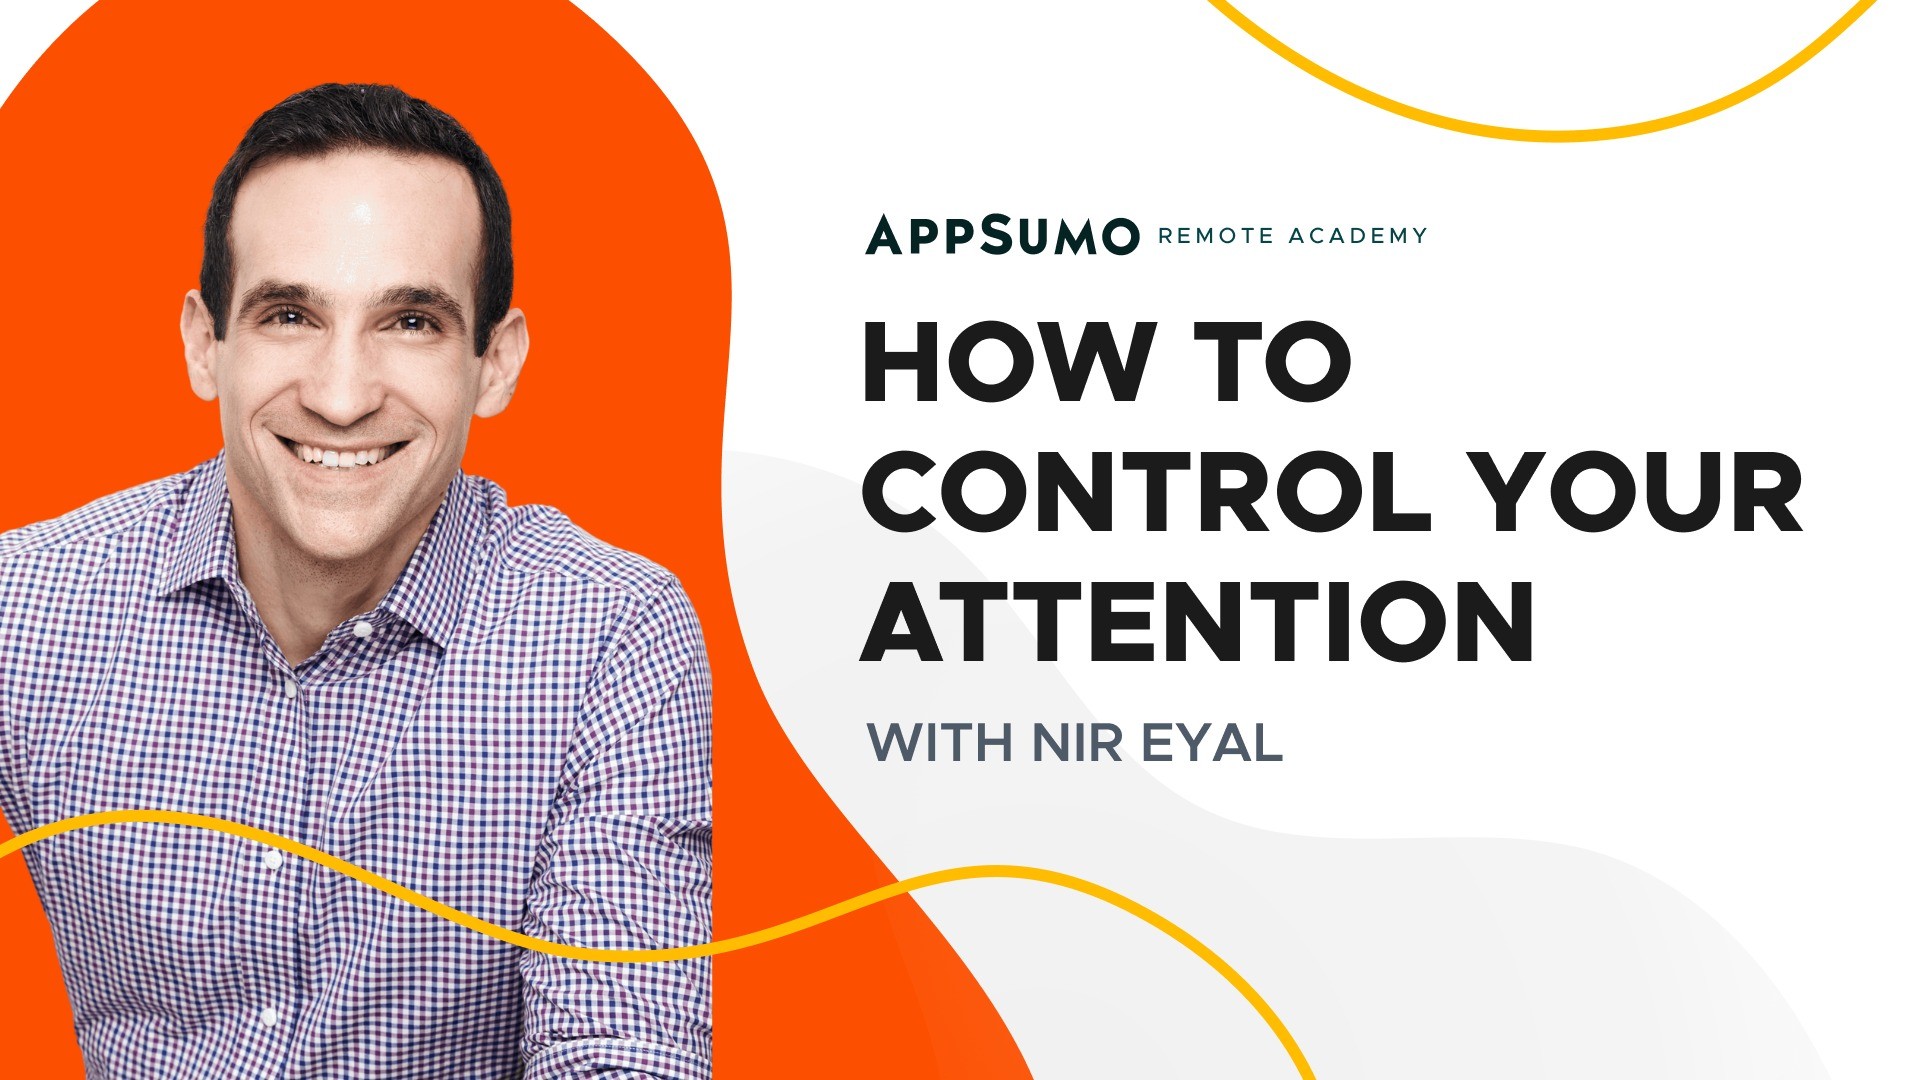 AppSumo Deal for Remote Work Academy: How to Control Your Attention - Plus exclusive